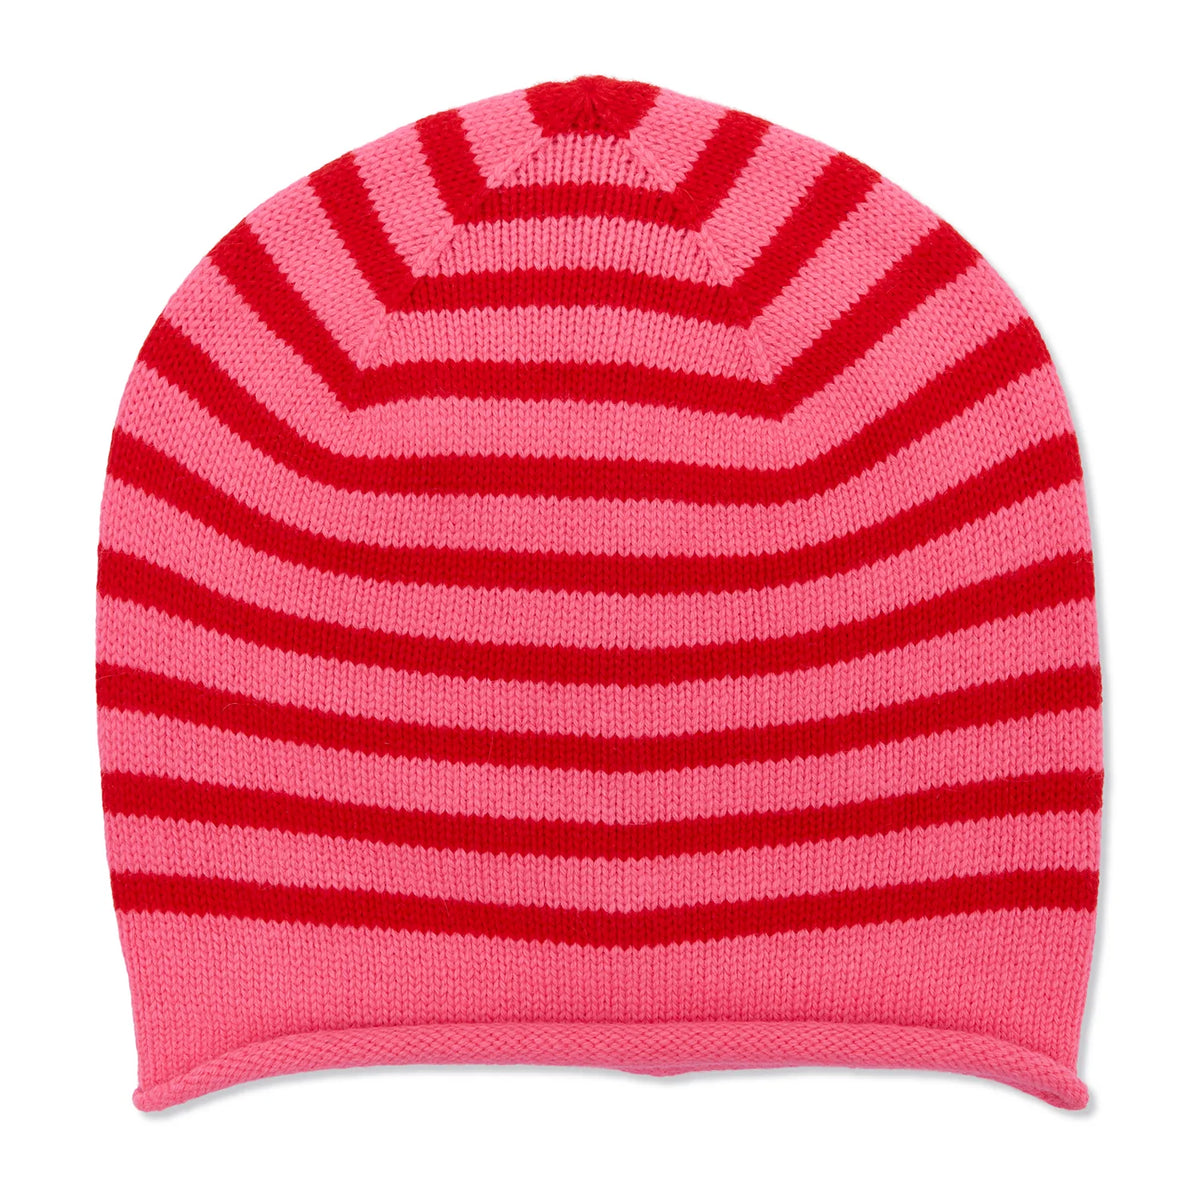 Pink and red stripe cashmere beanie with rolled hem